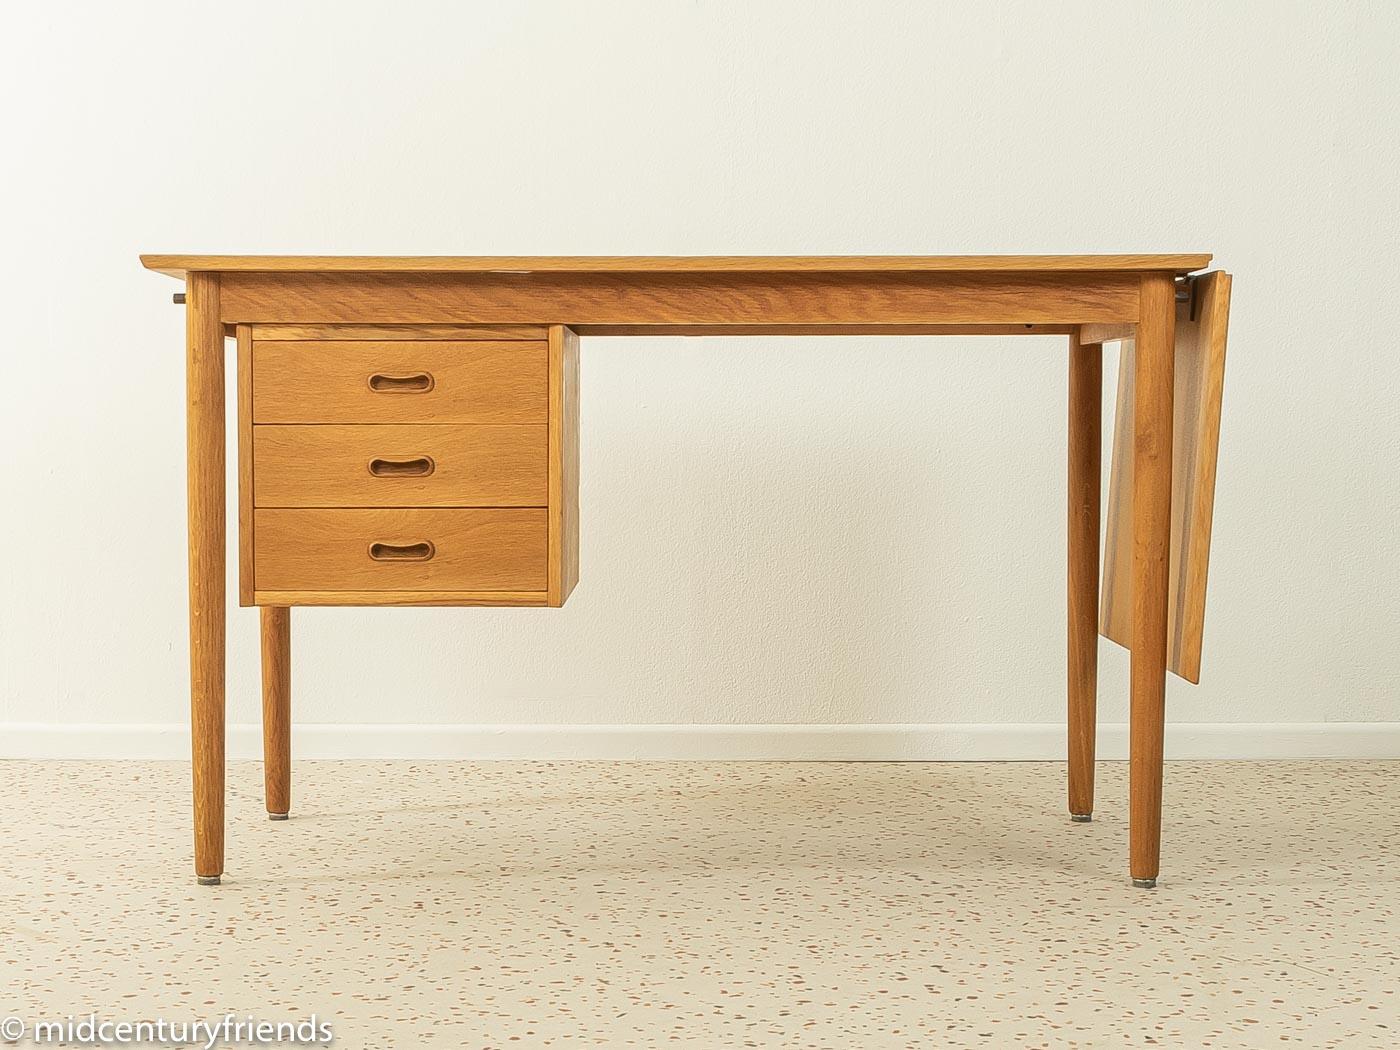 Wonderful freestanding desk by Arne Vodder for H. Sigh from the 1960s. High-quality corpus in oak veneer with three drawers and a removable extension leaf on the right. The desk top slides left to be fully extended. The drawer corpus slides from